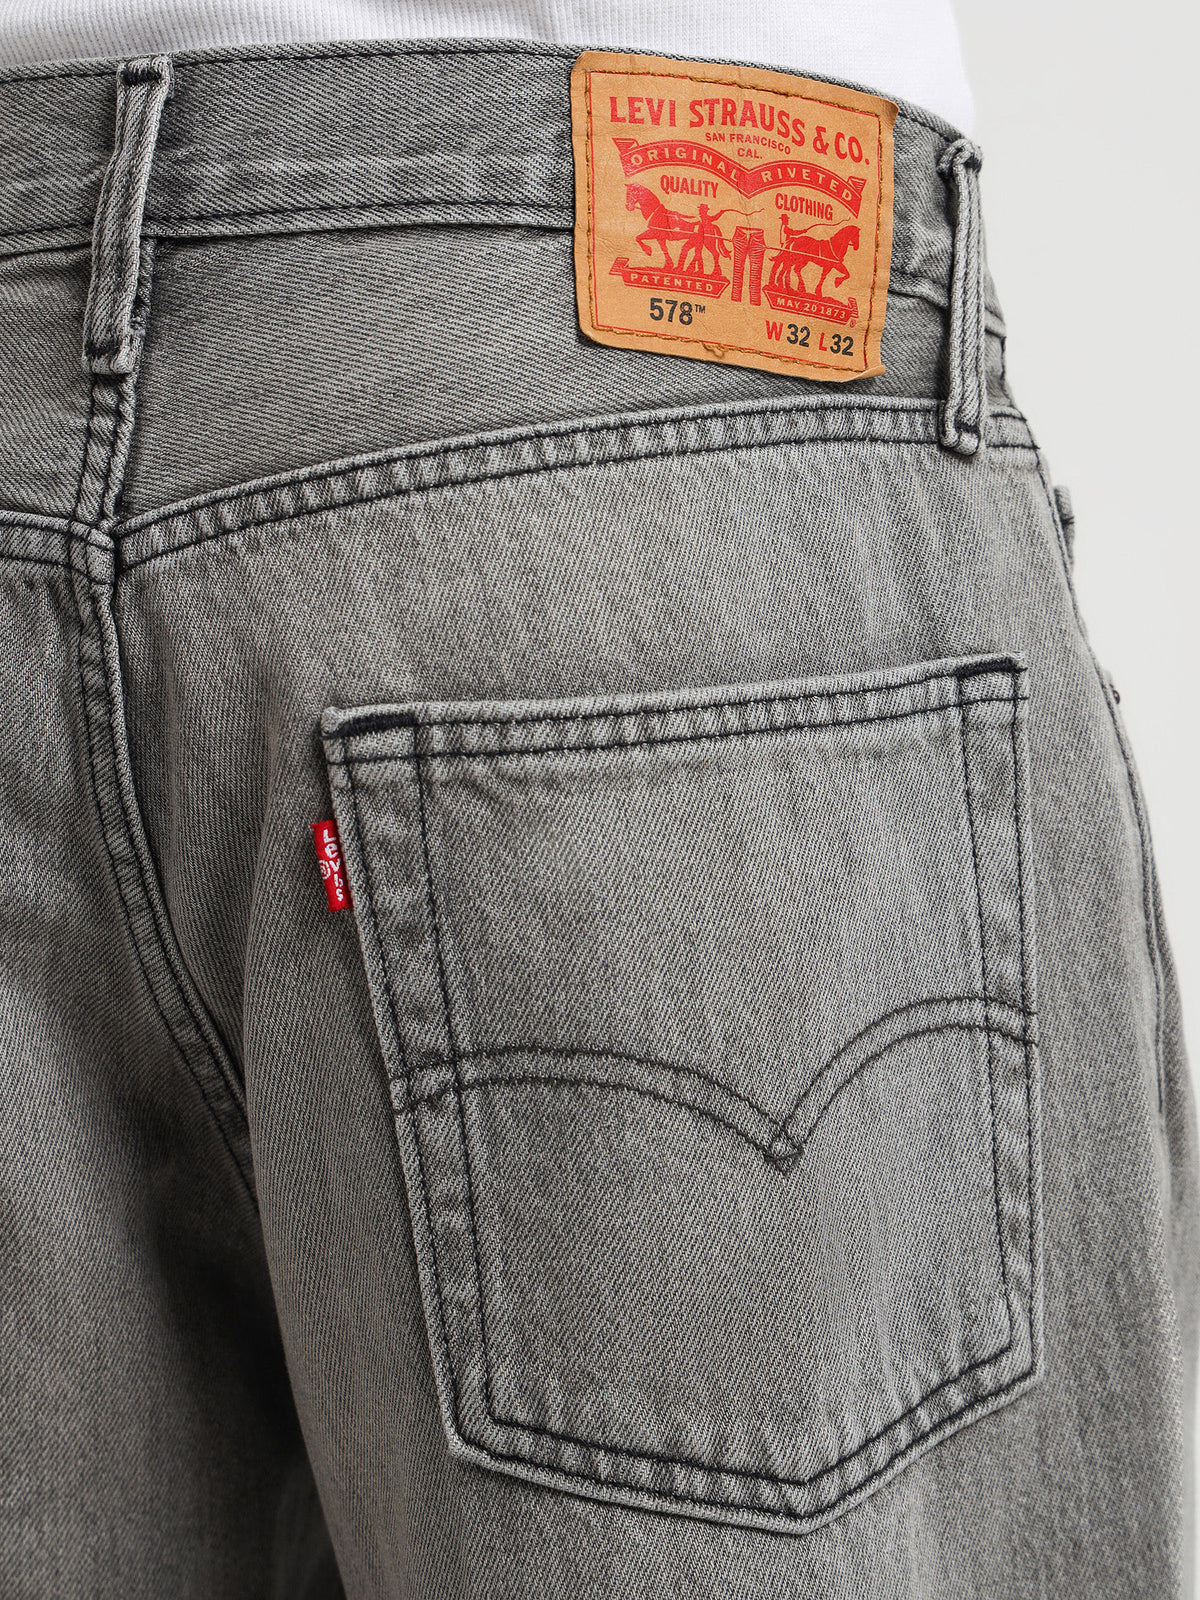 578 Baggy Jeans in Silver Silvertab